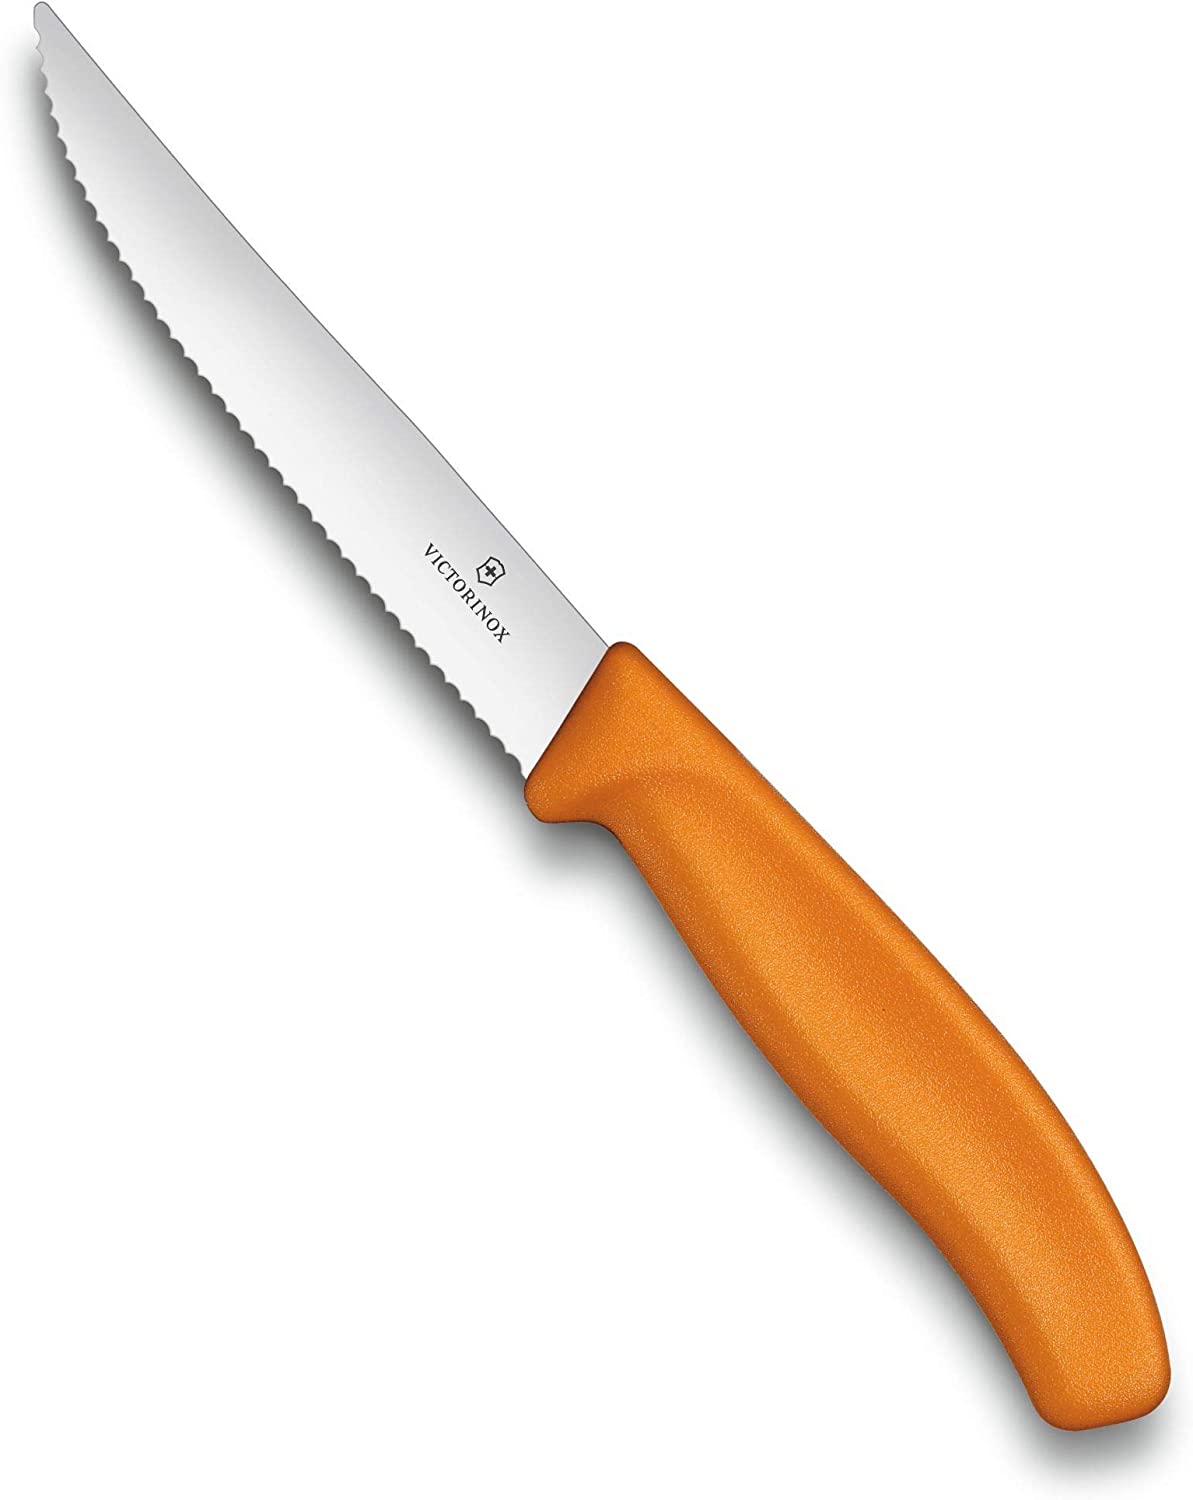 Victorinox Pizza Knife Orange SwissClassic with Waves 2 on Blister Pack